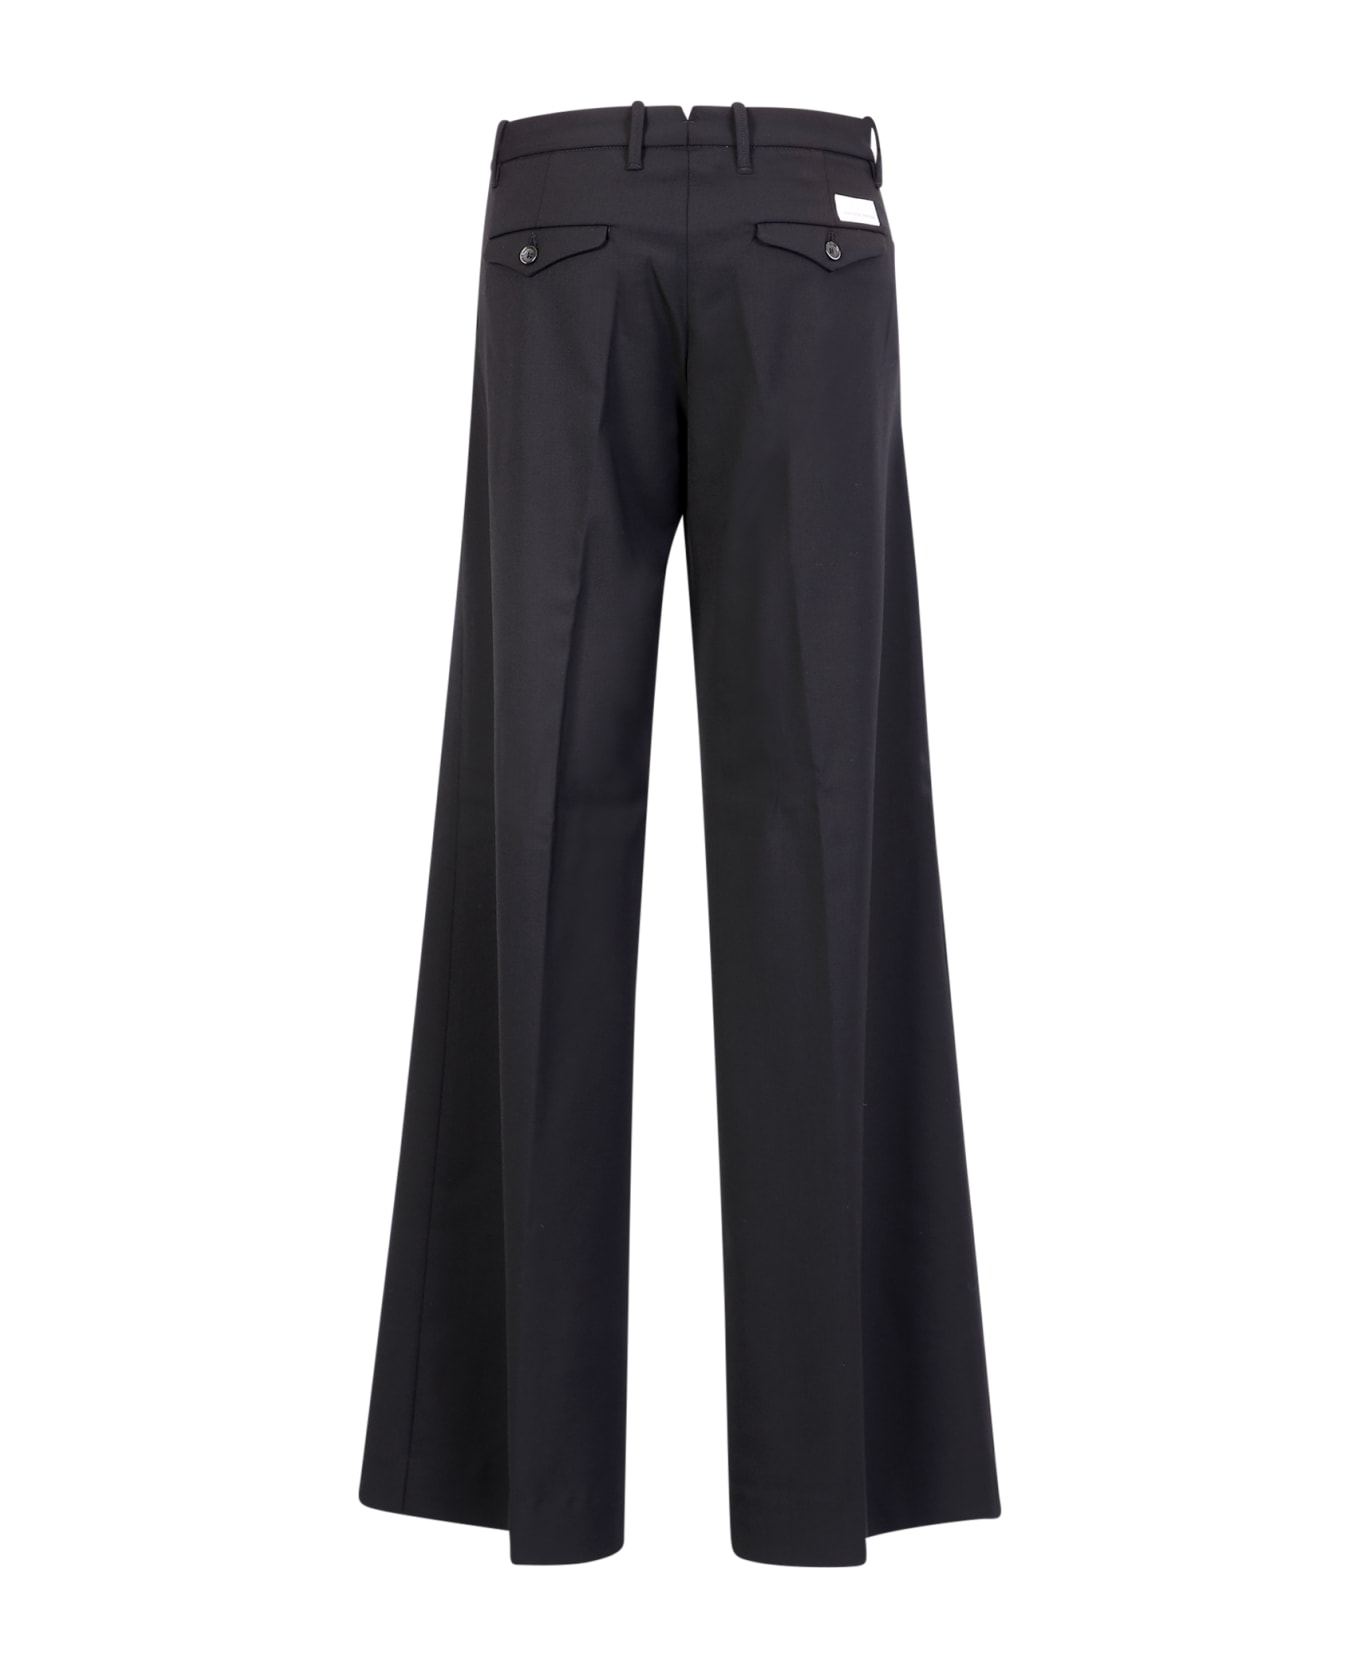 Nine in the Morning Silk Wool Blend Palazzo Trousers In Black - Black ボトムス